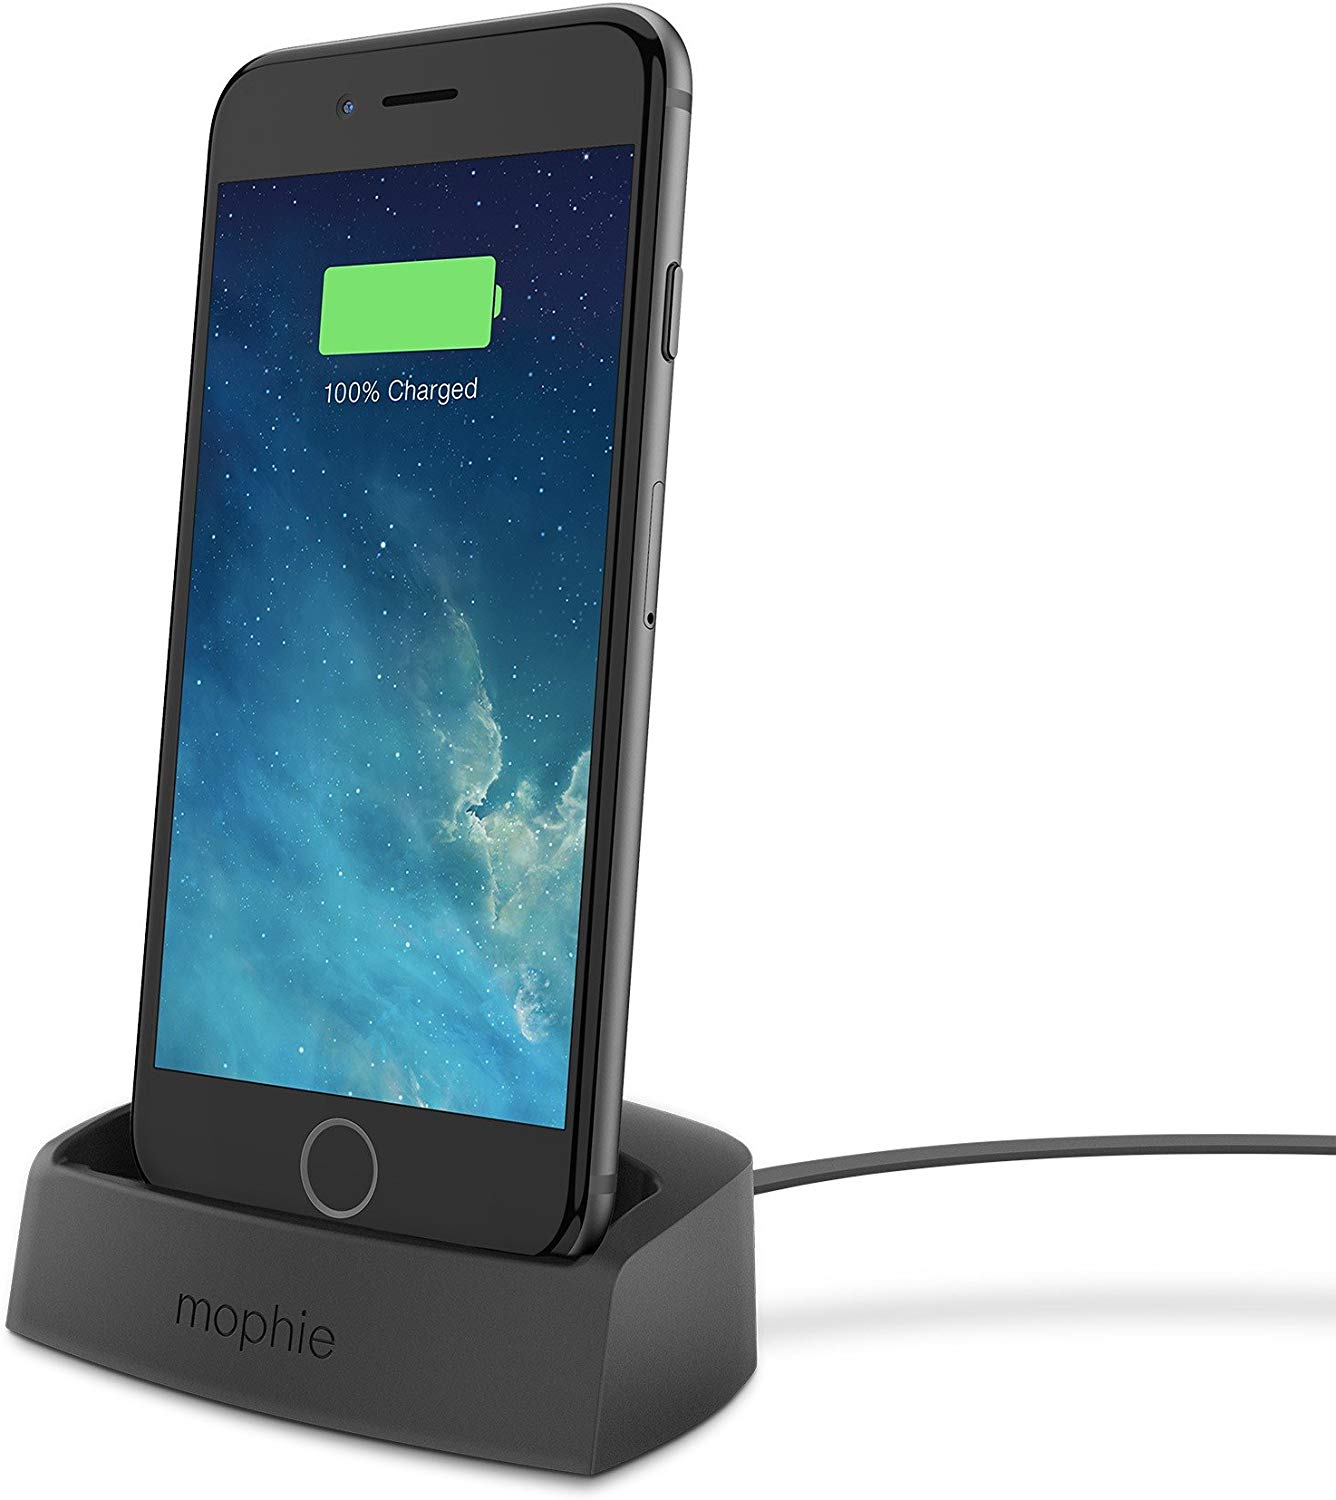 Mobile ch. Iphone 5 Dock. Mophie.